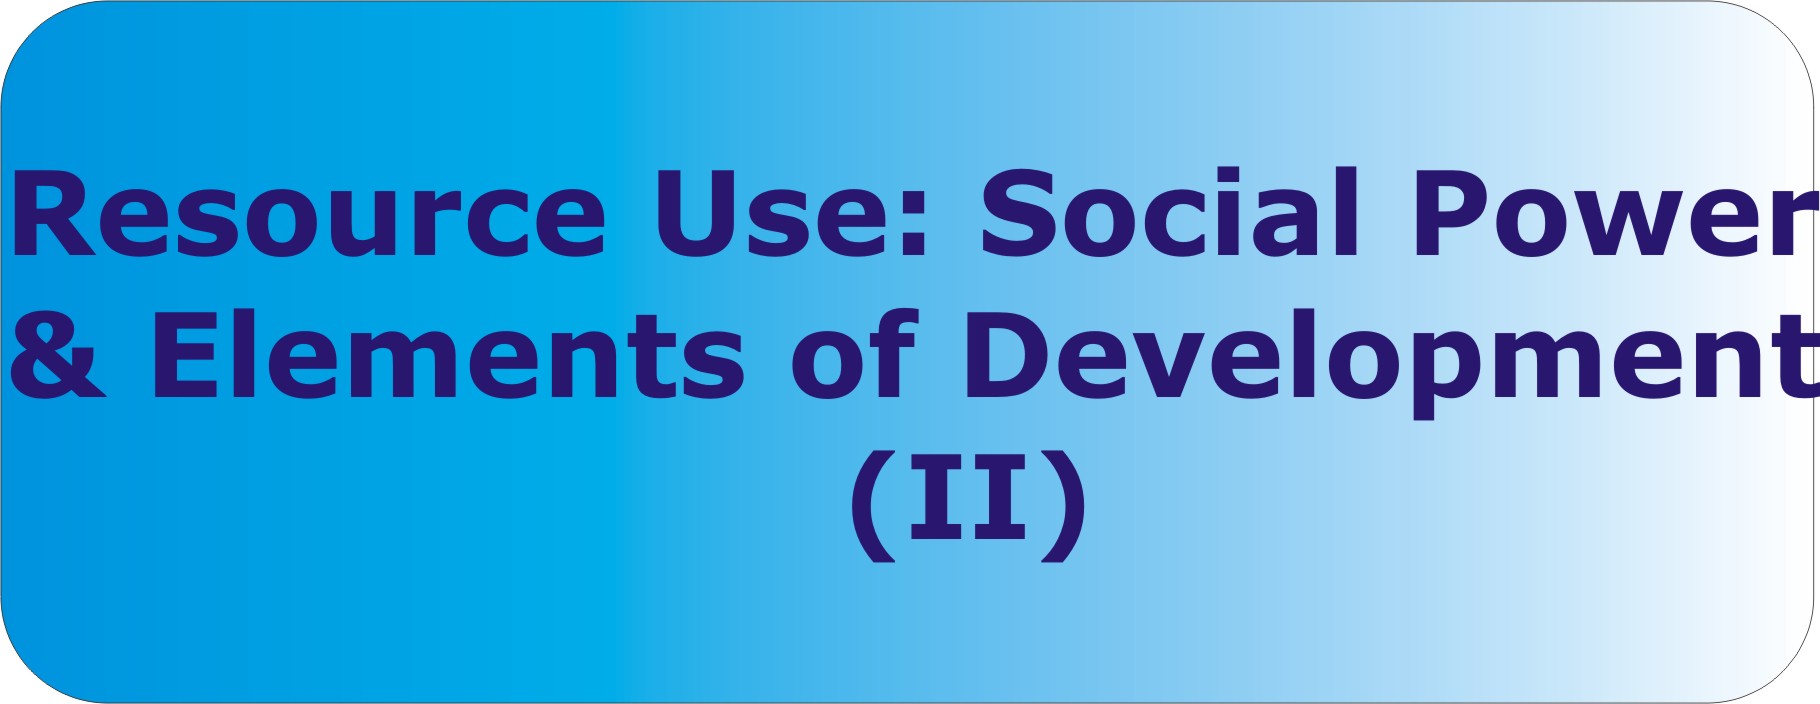 Resource Use: Social Power and Elements of Development-II